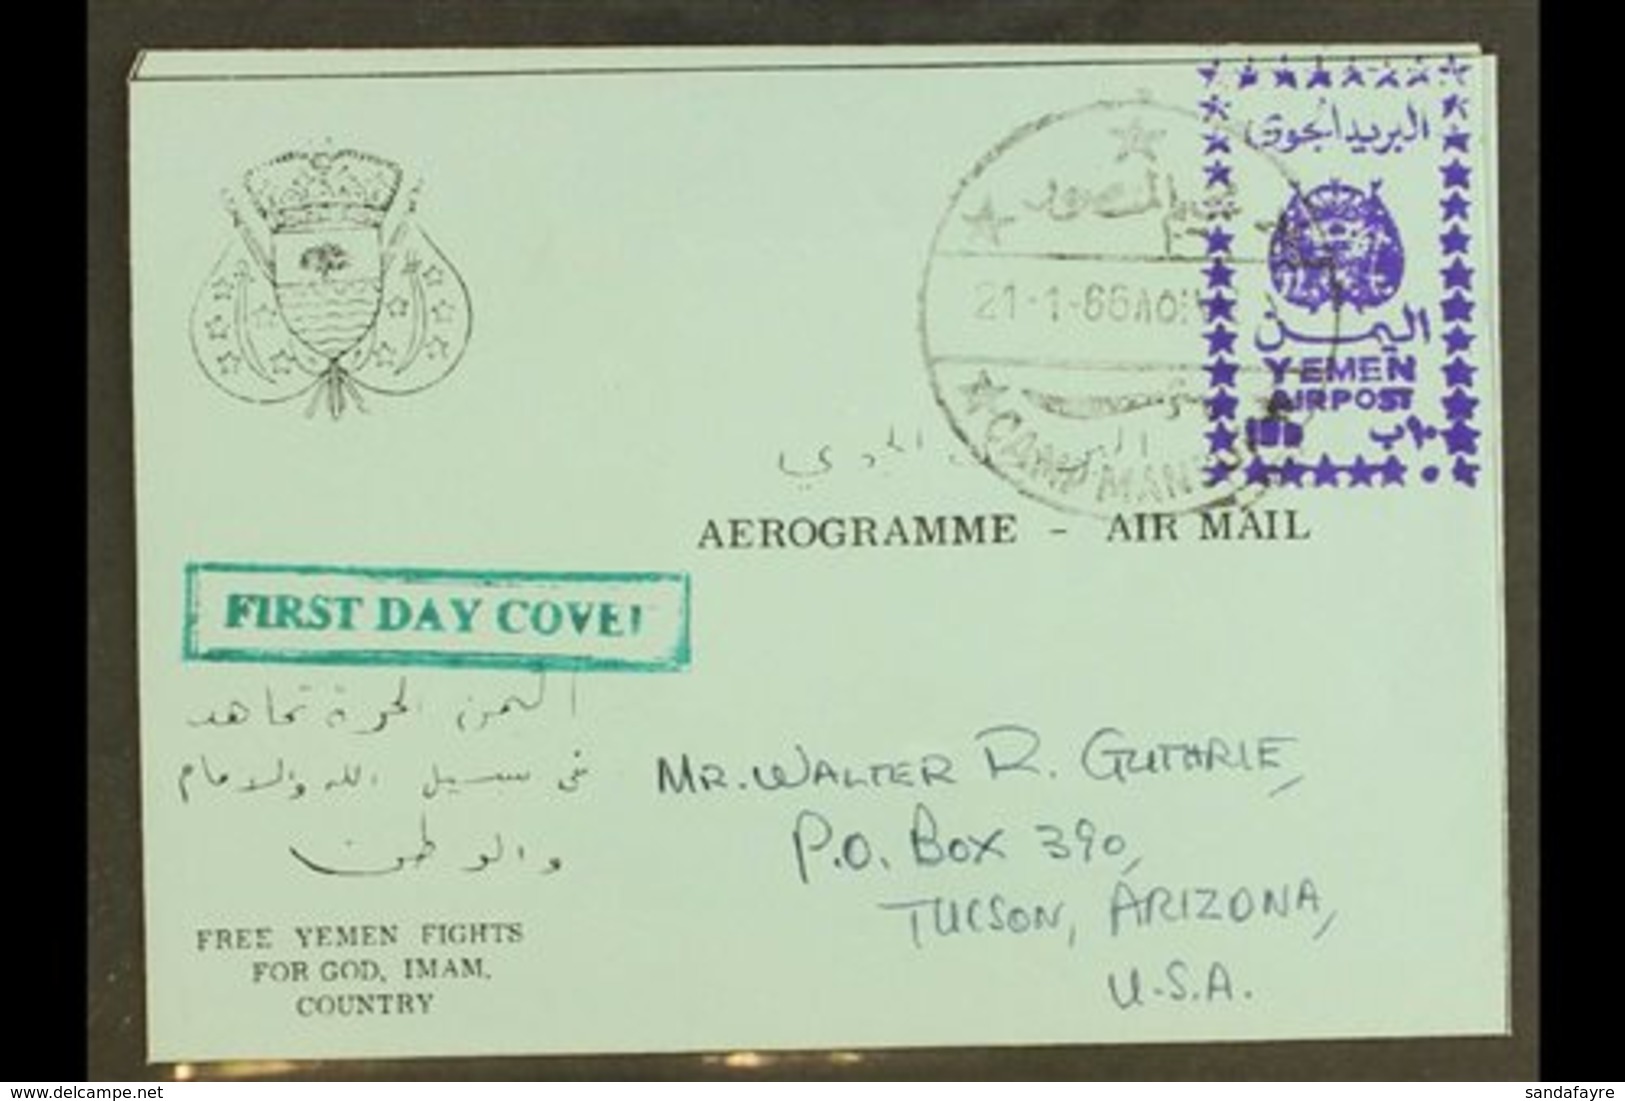 ROYALIST  1966 (21 Jan) 10b Violet Handstamp (as SG R130/134) On Blue Aerogramme Addressed To The USA And Cancelled By C - Yemen